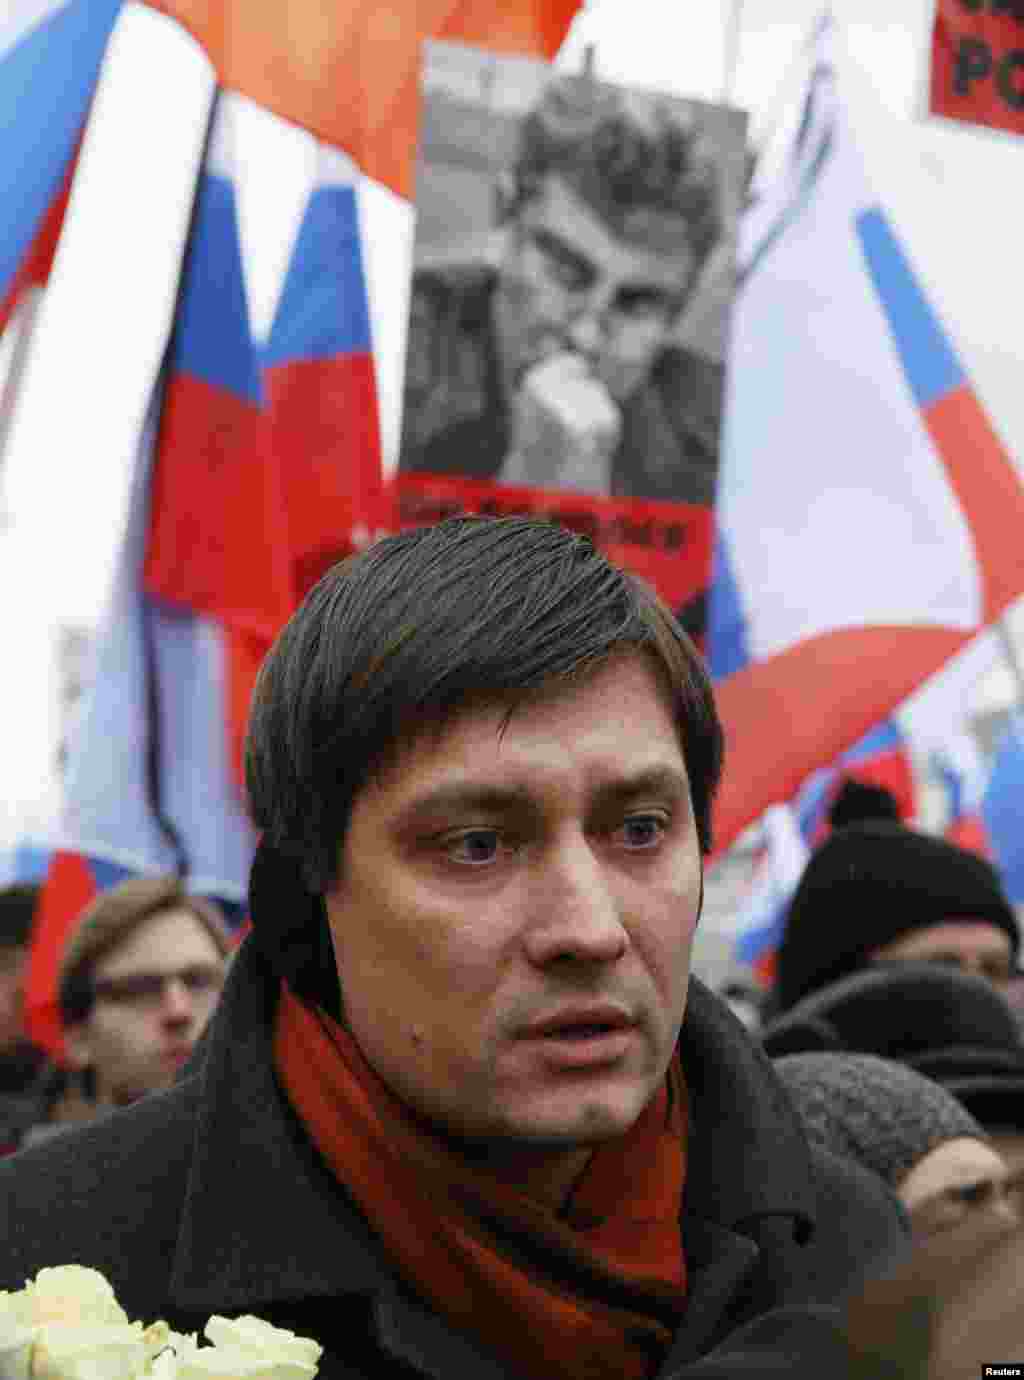 Dmitry Gudkov, a member of the Russian parliament, attends a march to commemorate Kremlin critic Boris Nemtsov, who was shot dead Friday, in Moscow, March 1, 2015. 